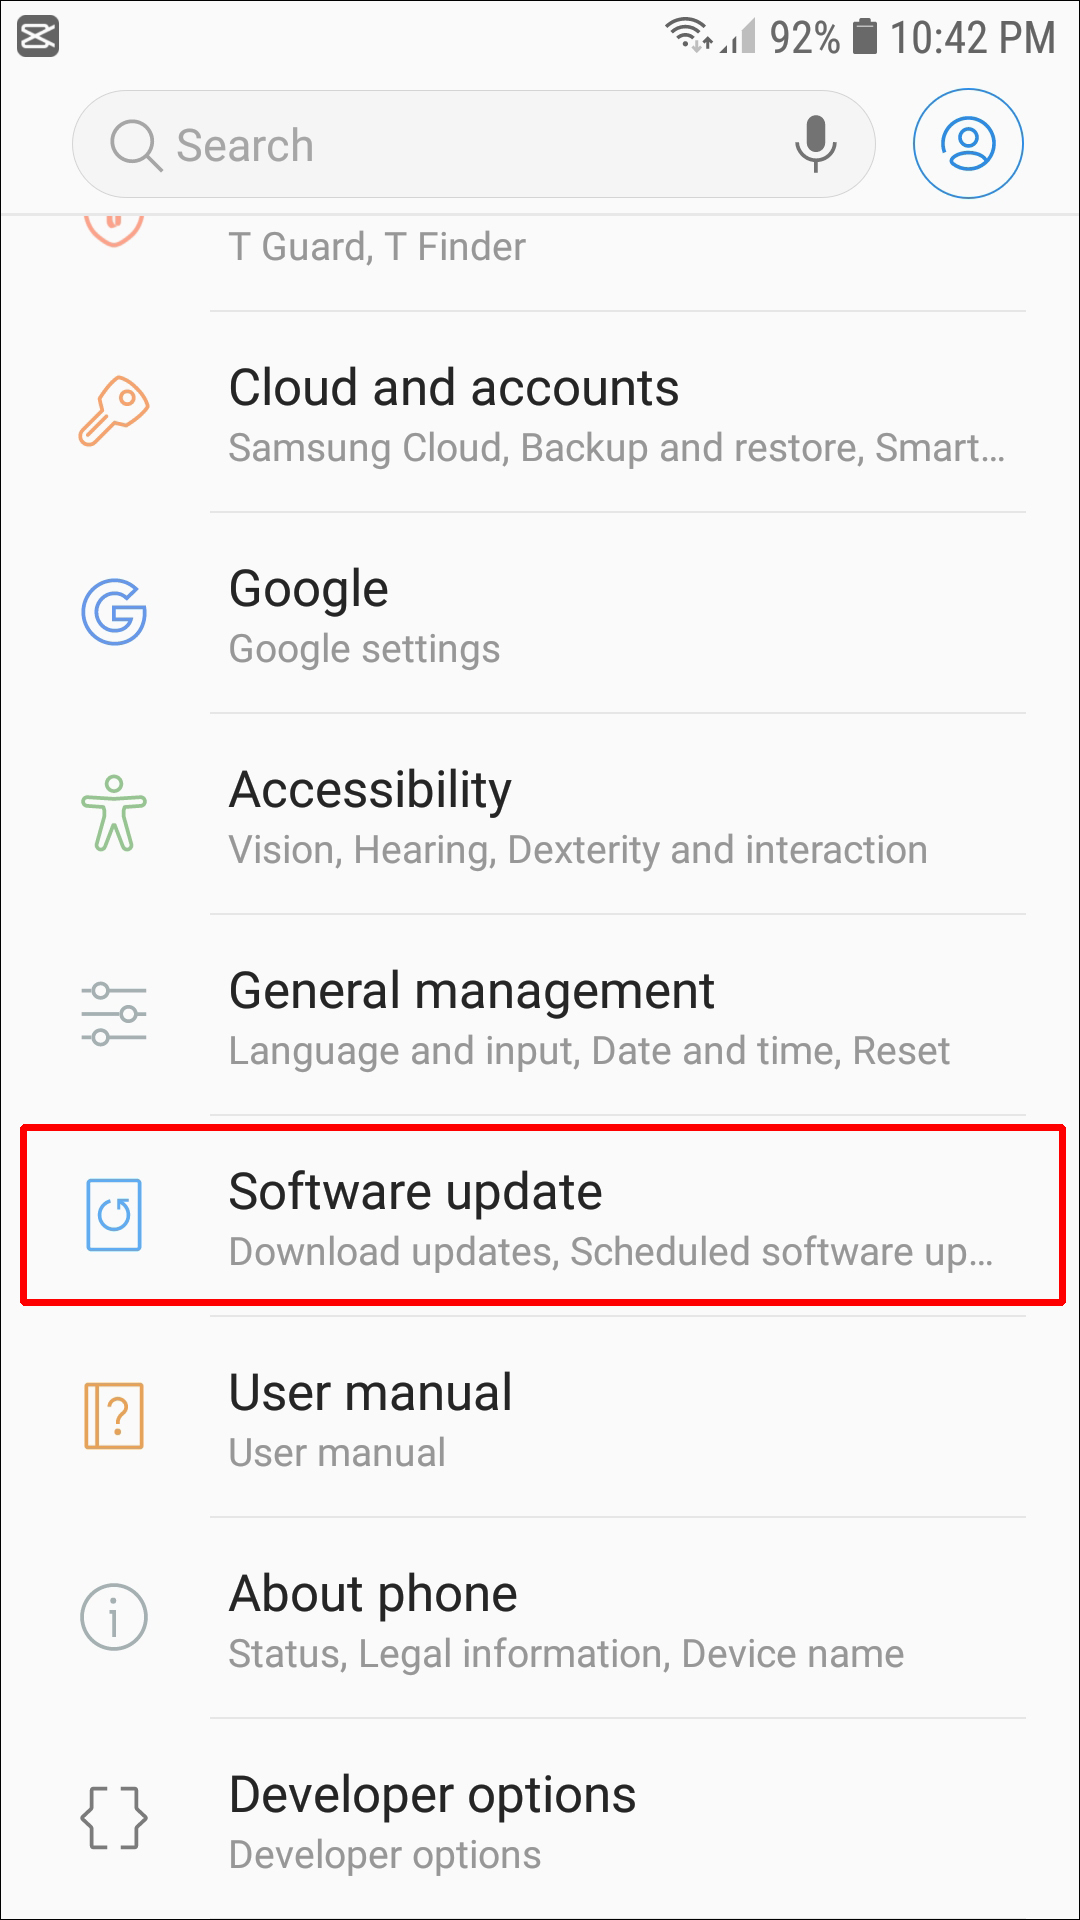 Go to your device's settings.
Select "System updates."